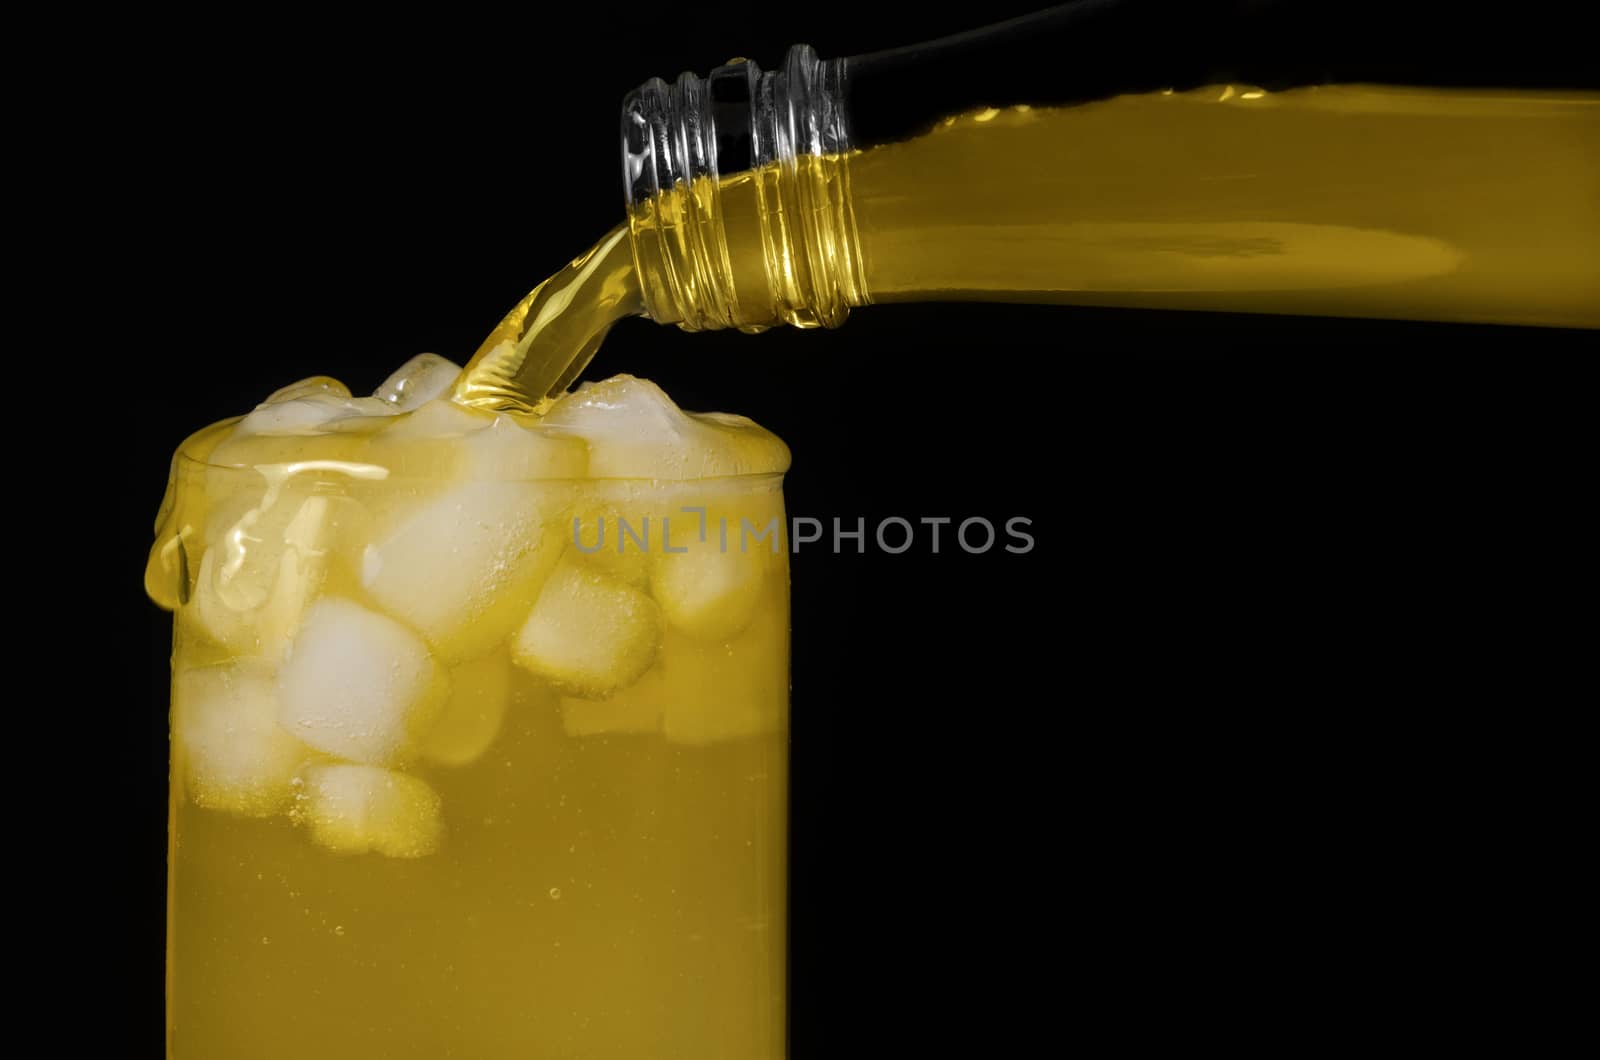 Lemonade is poured into the glass, on a black background by Gaina